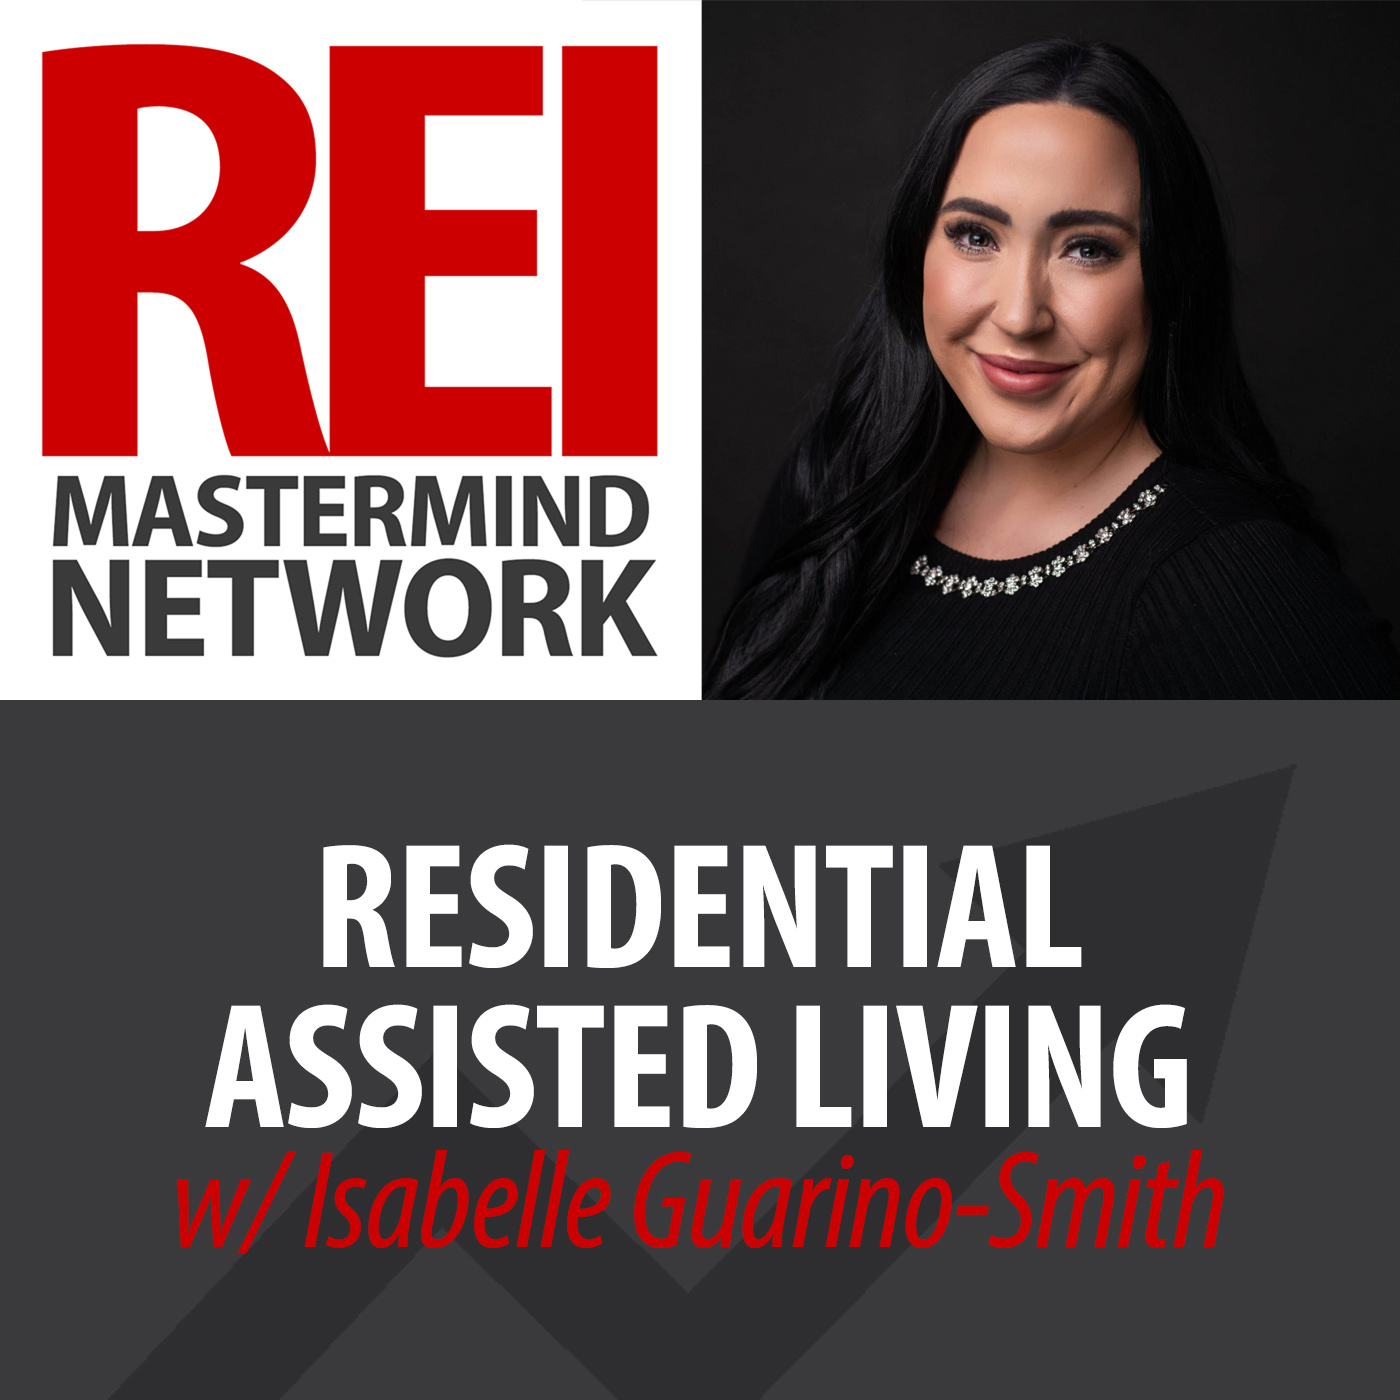 Residential Assisted Living with Isabelle Guarino-Smith